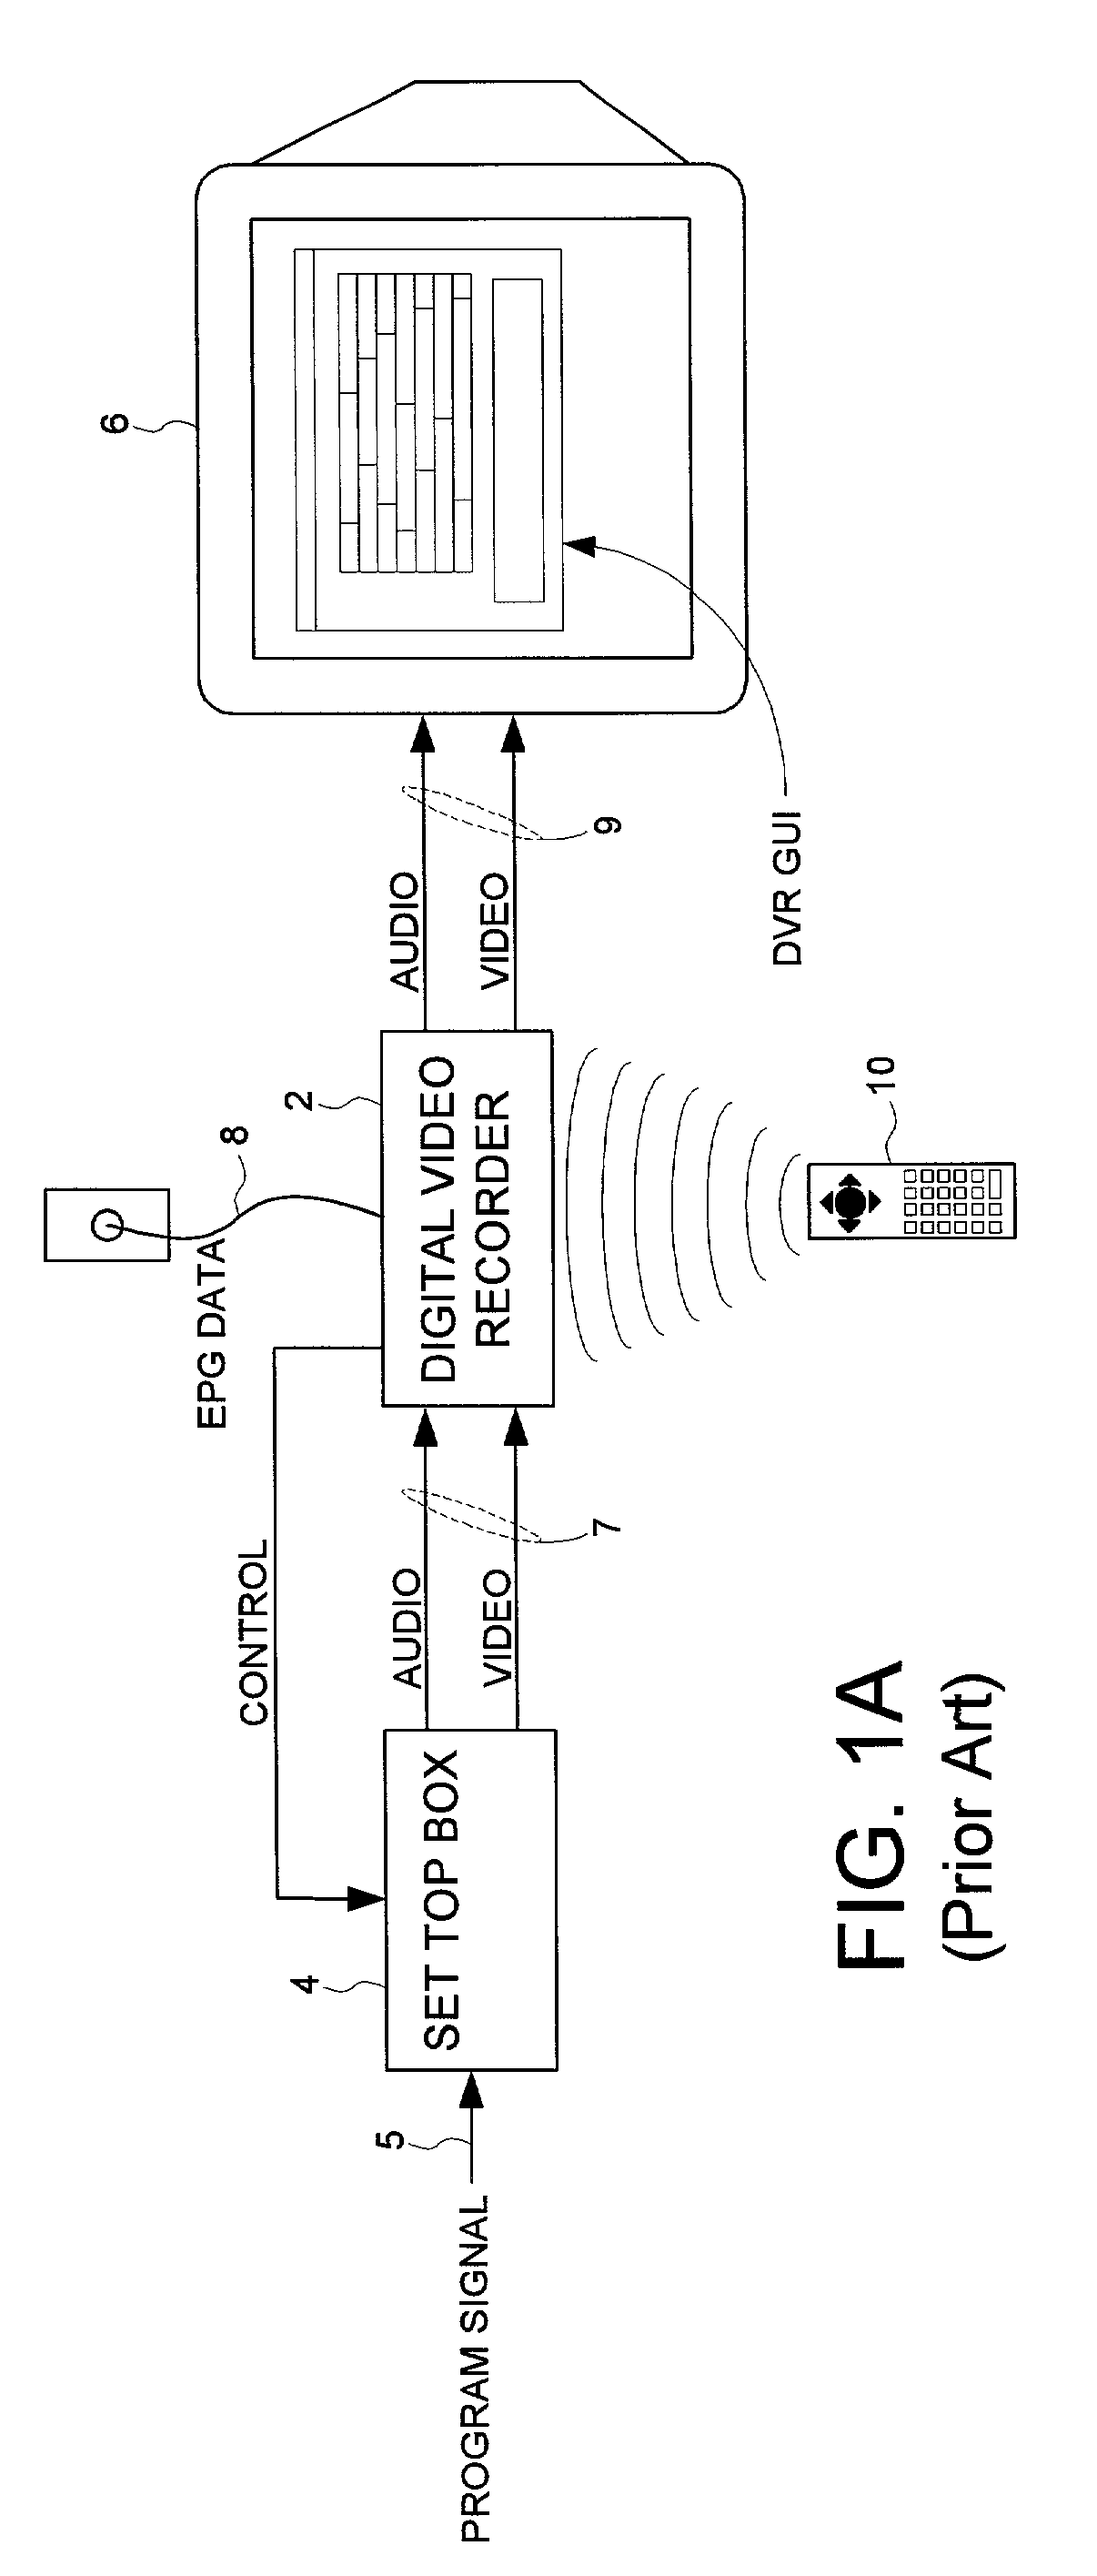 Communicating program identifiers from a digital video recorder (DVR) to a set top box (STB) independent of when the STB demodulates the associated program data